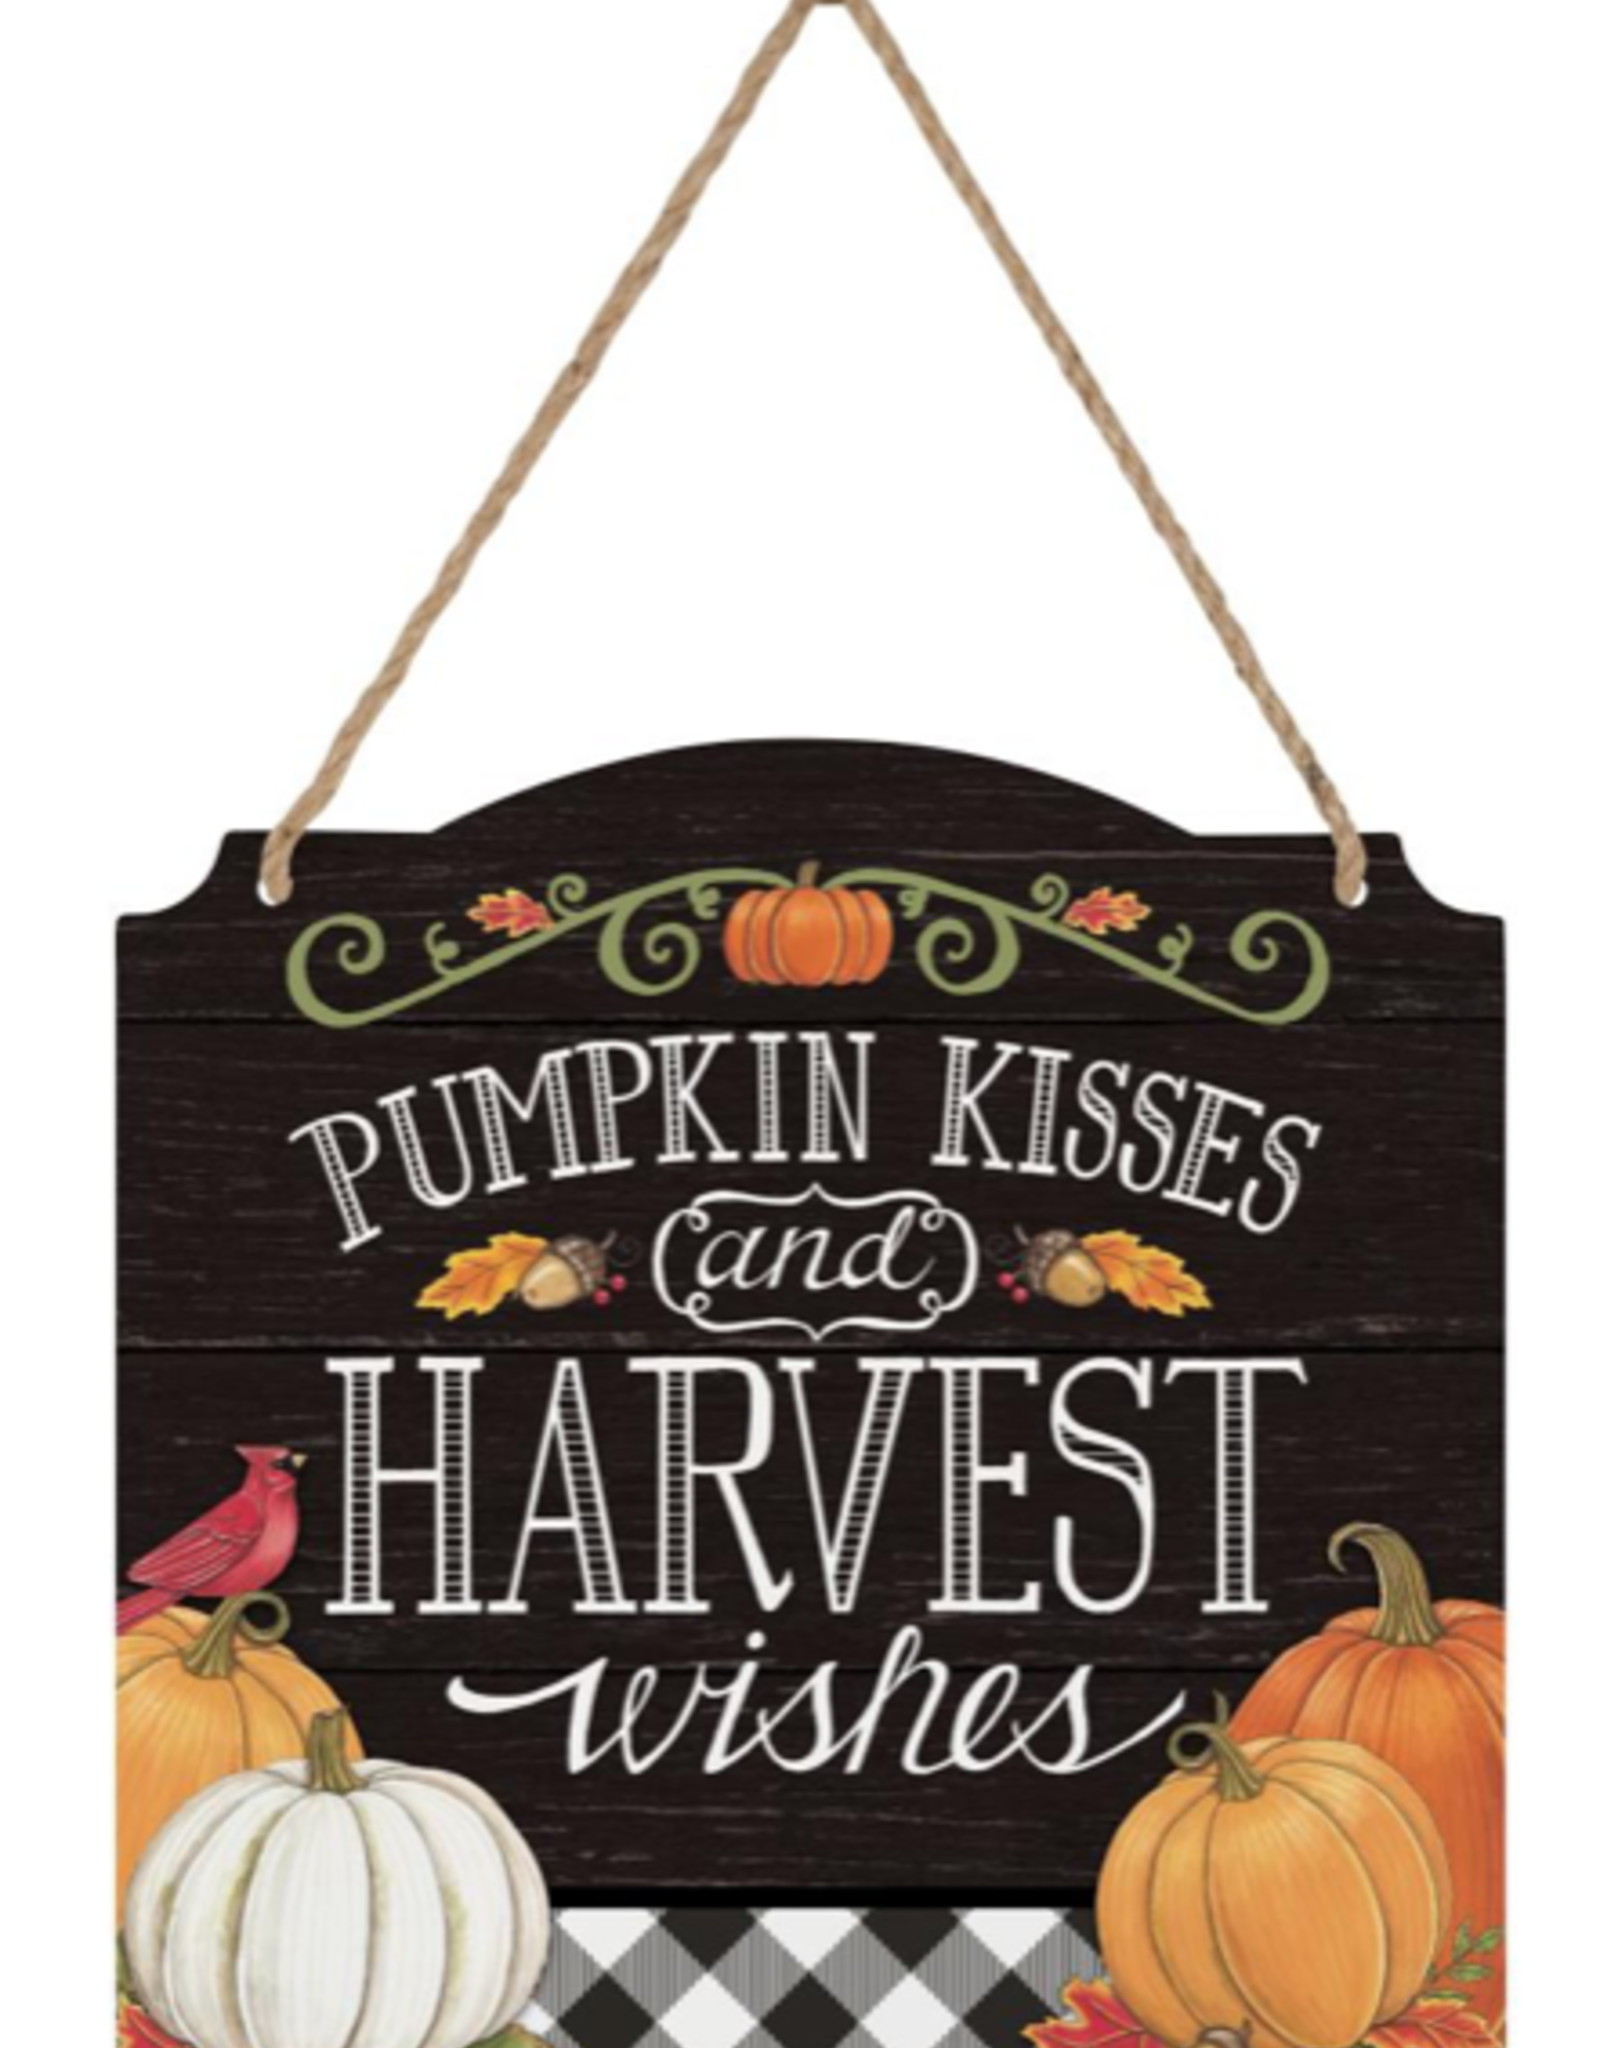 Carson EL43441 Harvest Wishes Metal Wall Sign